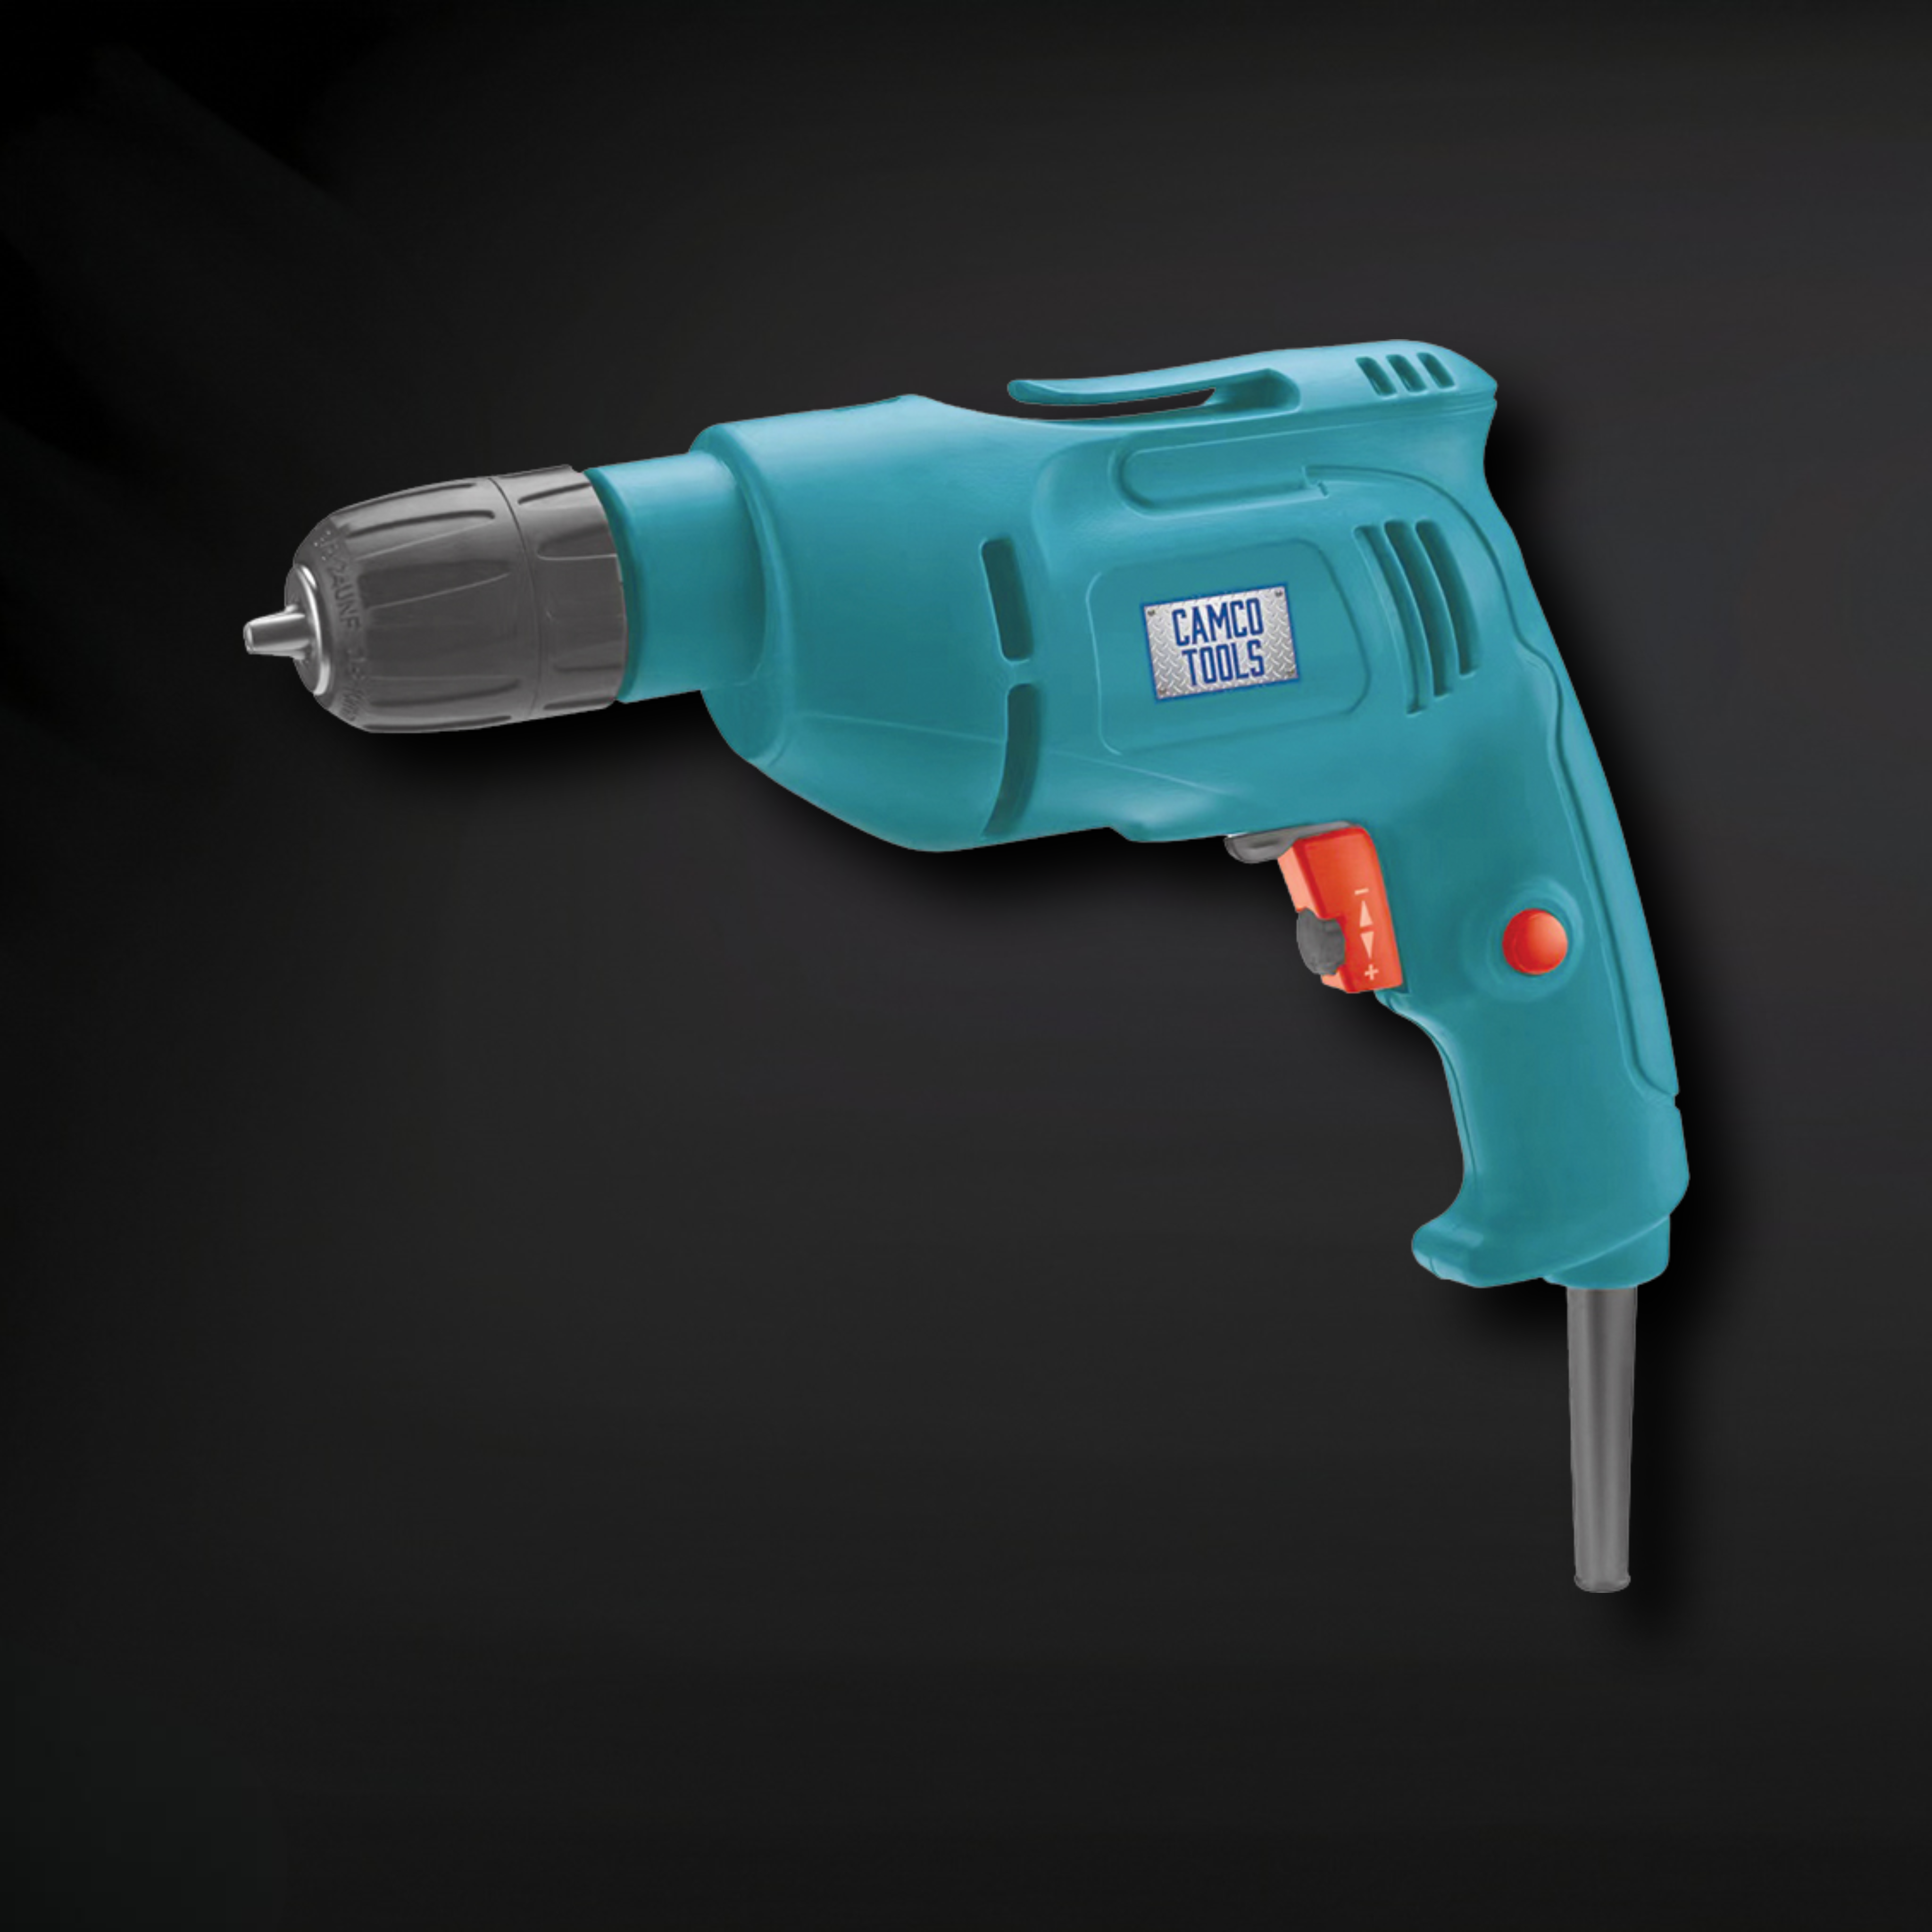 ''Electric DRILL - 3/8''''''''''''''''''''''''''''''''''''''''''''''''''''''''''''''''''''''''''''''''''''''''''''''''''''''''''